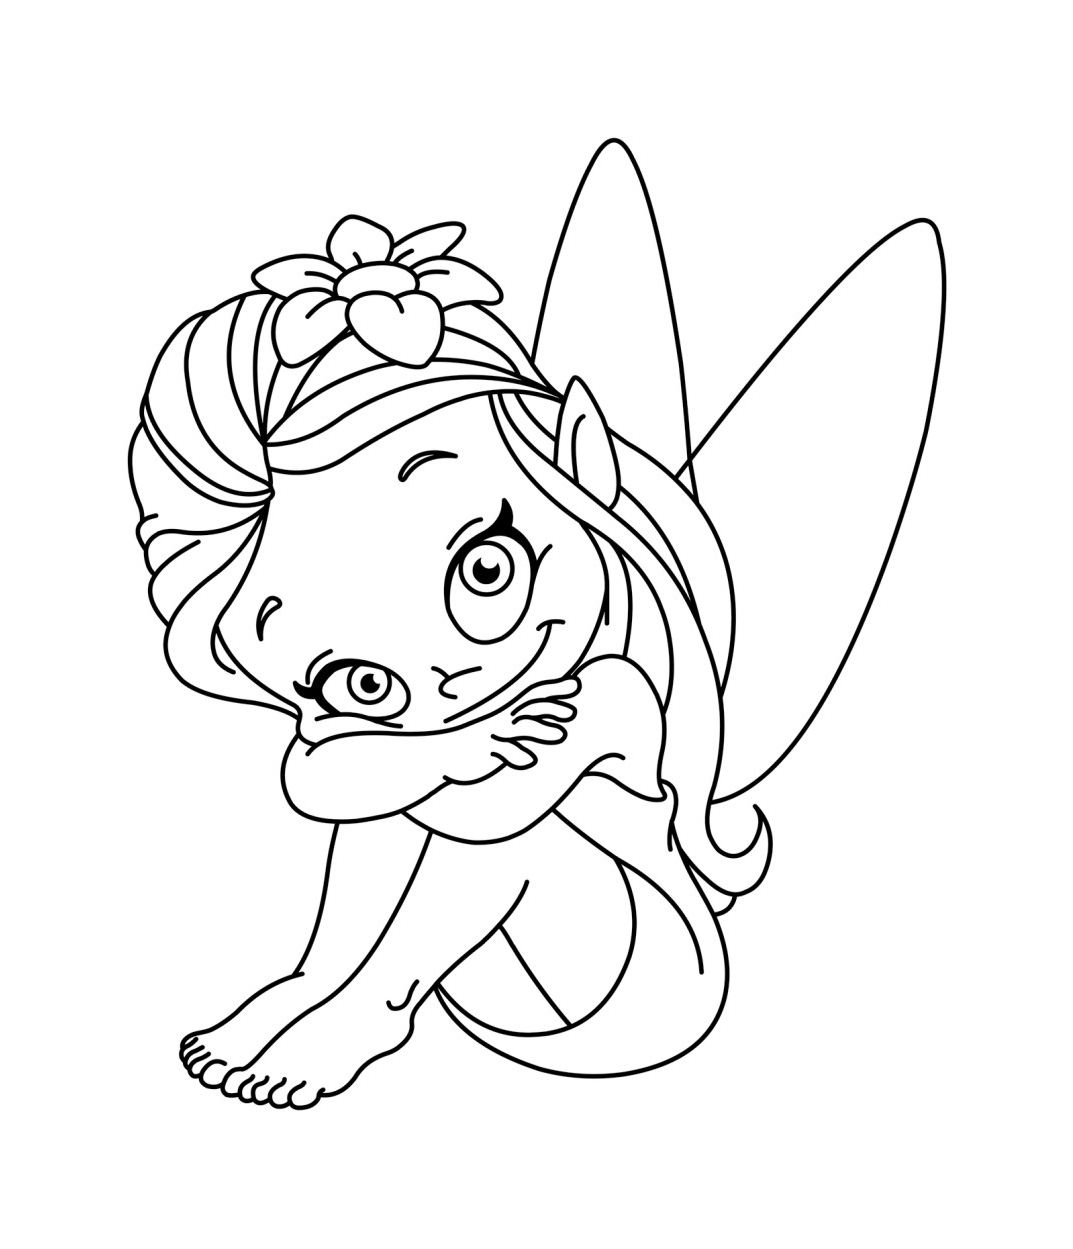 How to draw a Fairy | Easy Fairy Drawing for Kids | Drawing for a - YouTube